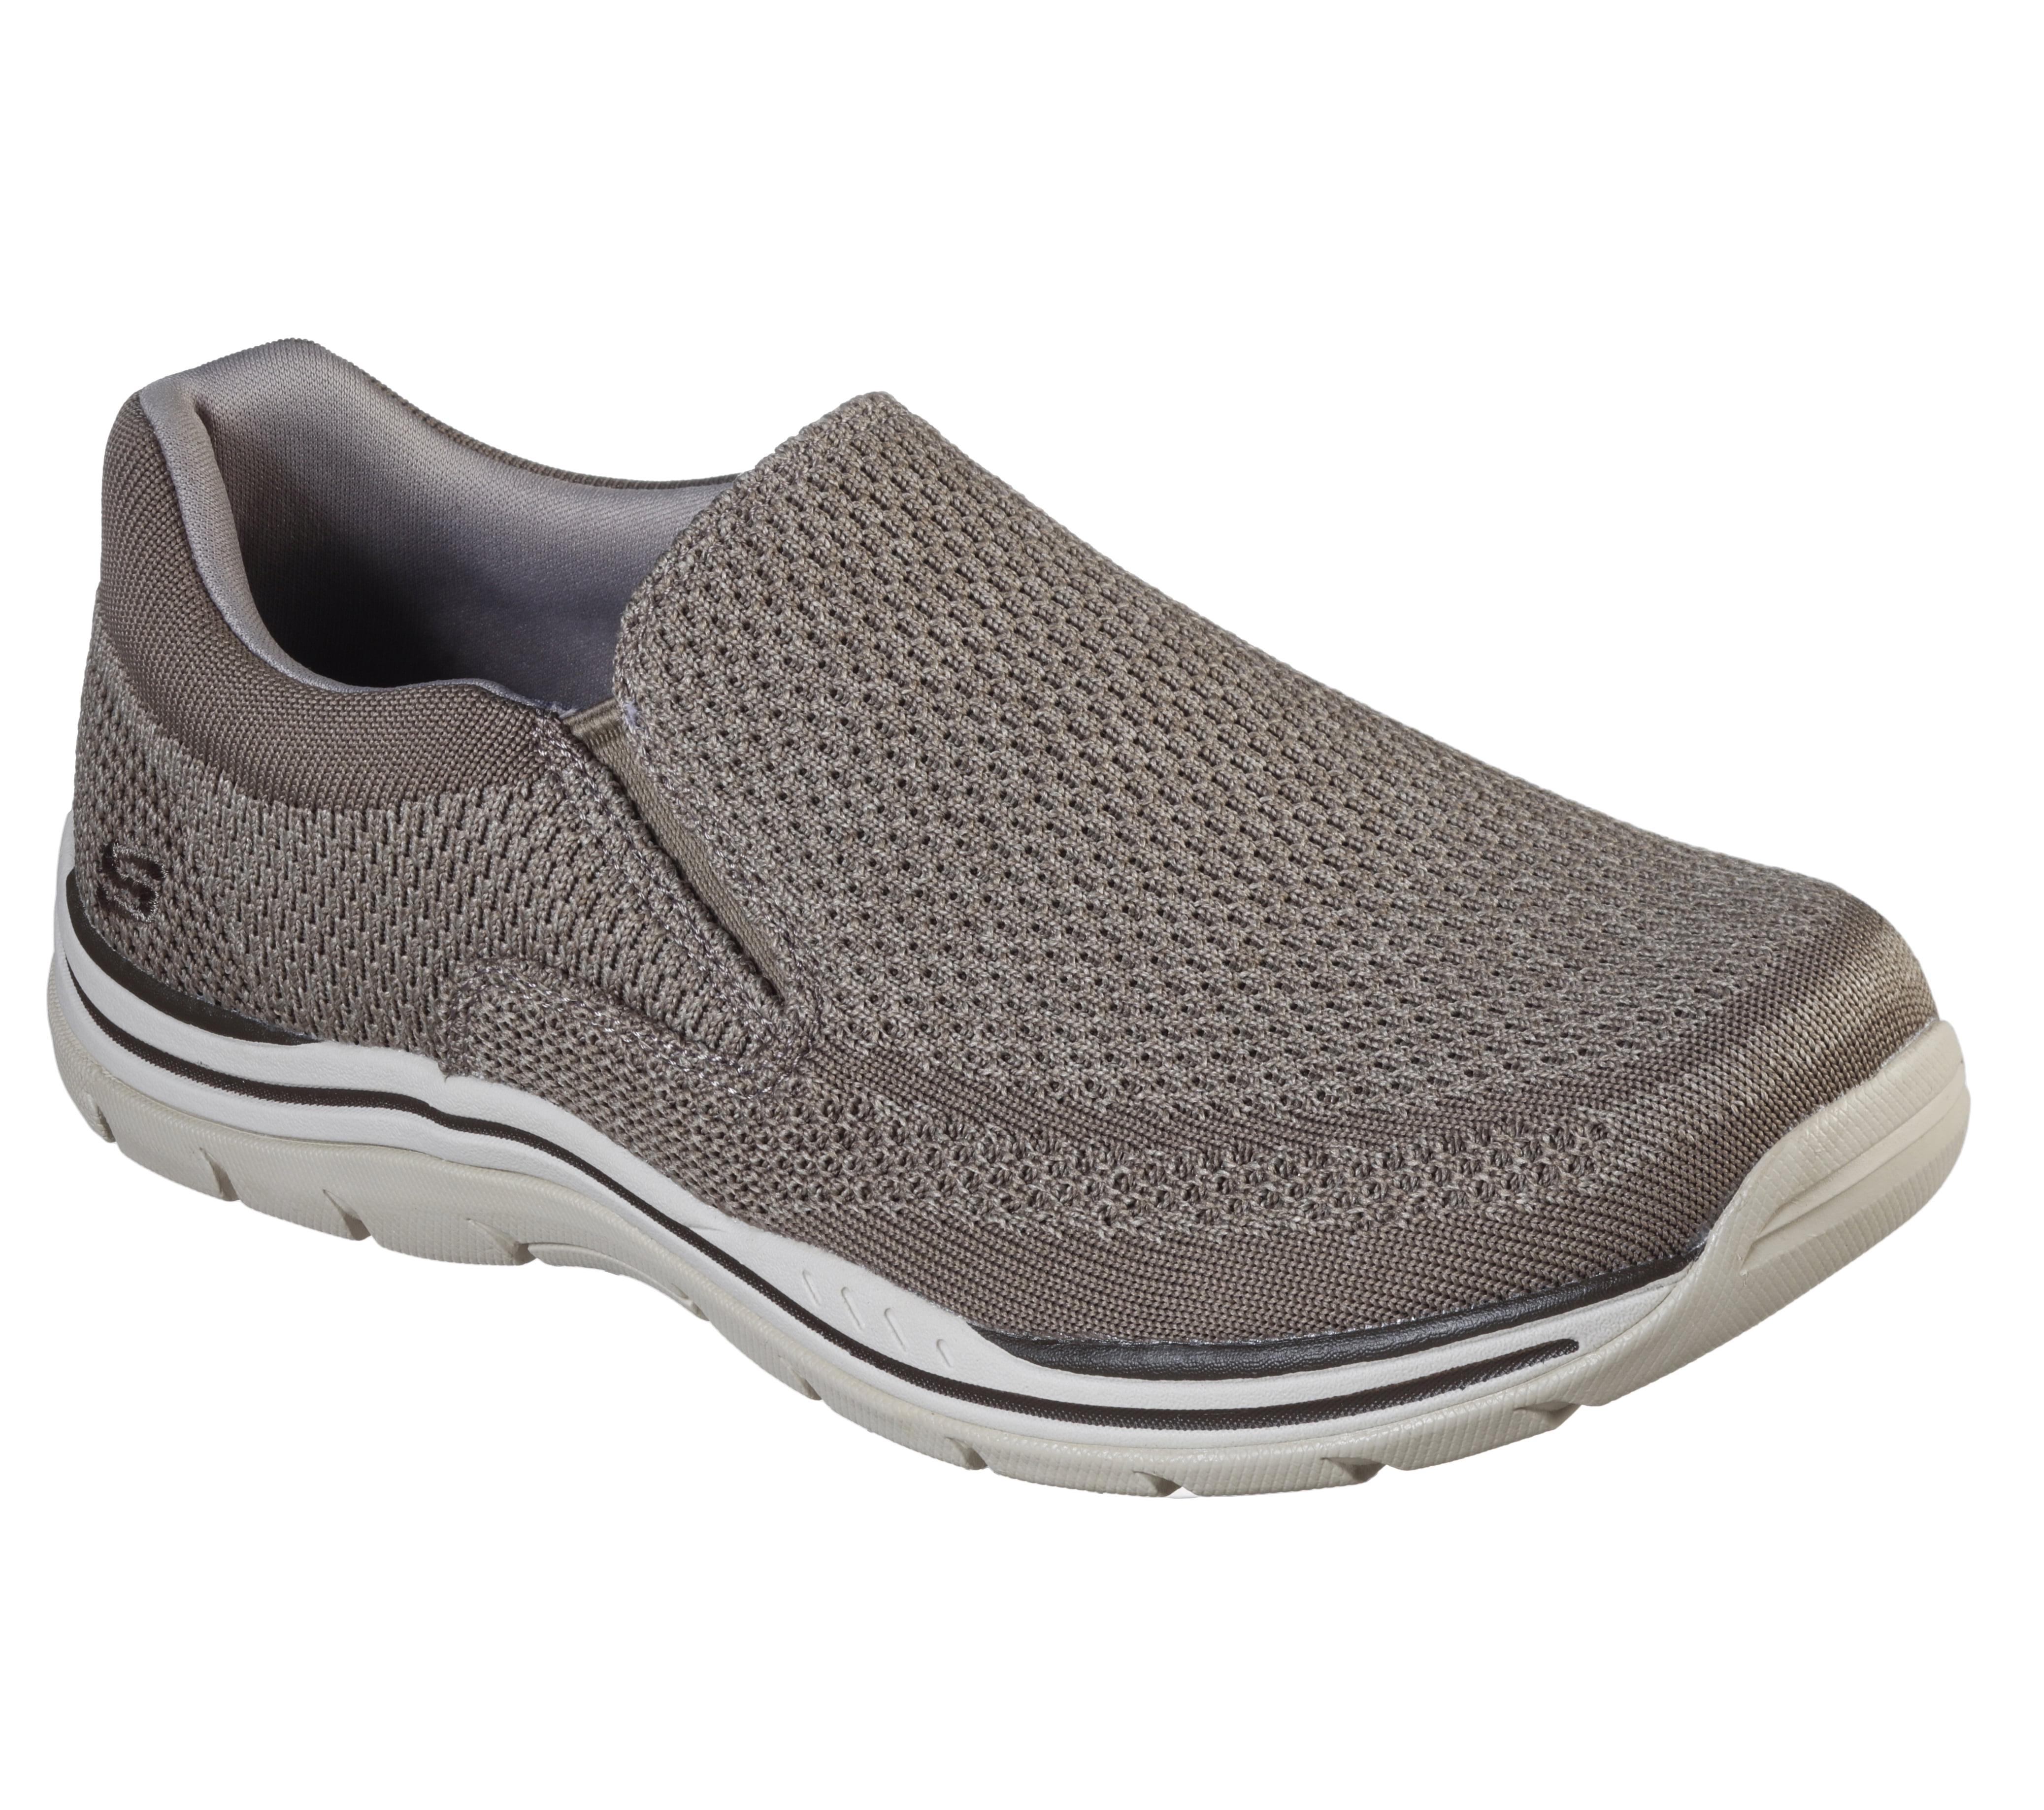 Skechers Men's Relaxed Fit Expected Gomel Casual Slip-on Sneaker Available) - Walmart.com